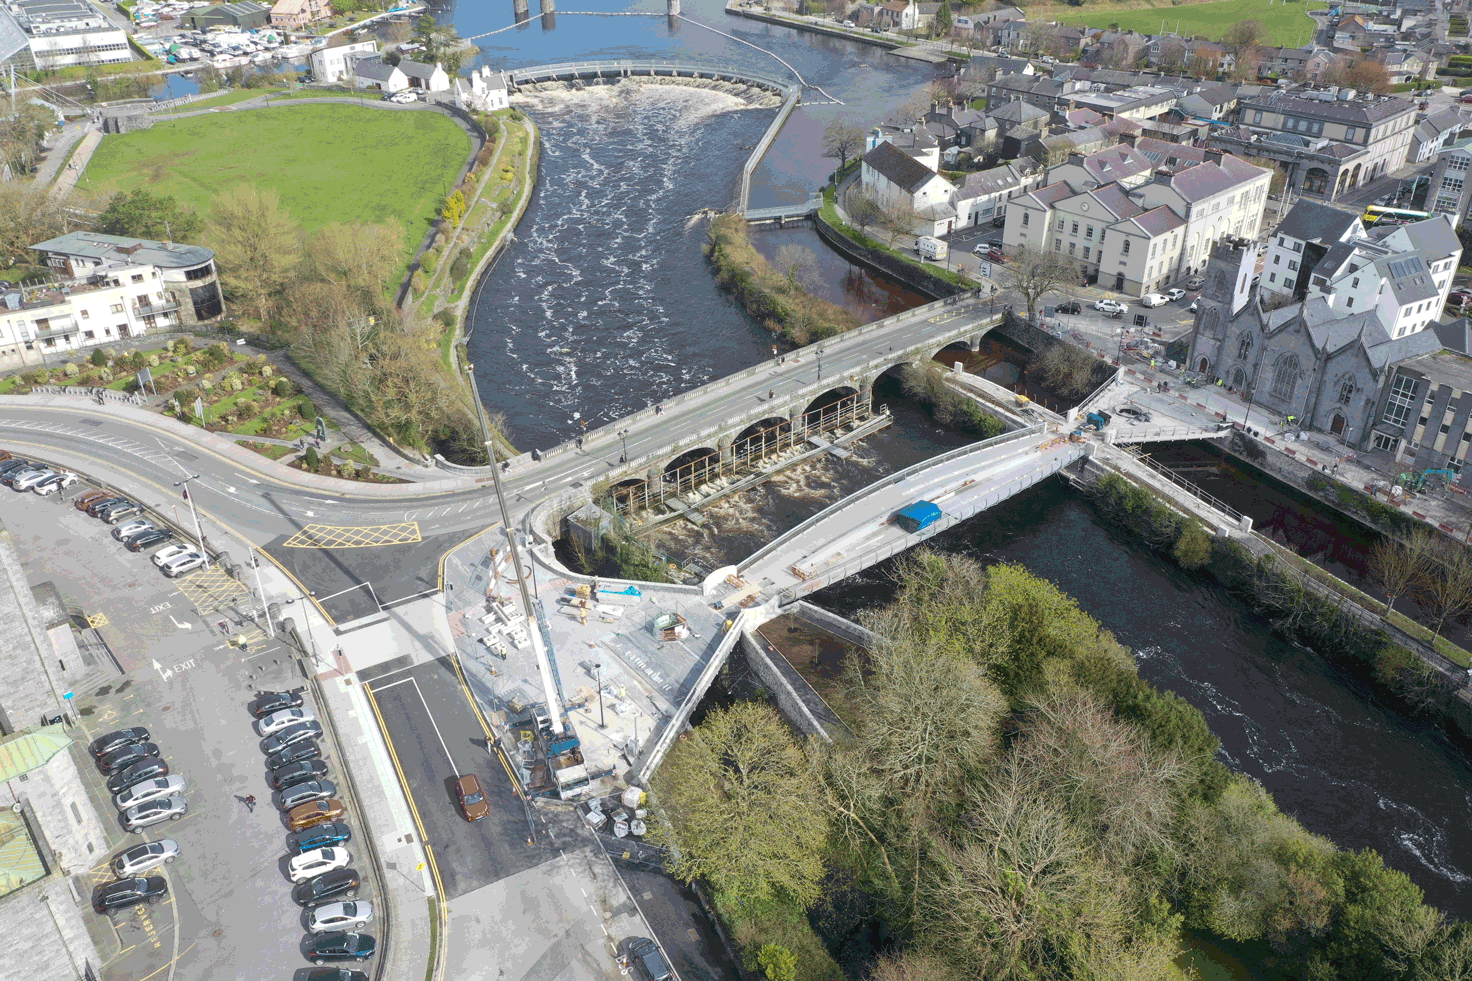 The new Salmon Weir pedestrian and cycle bridge in Galway